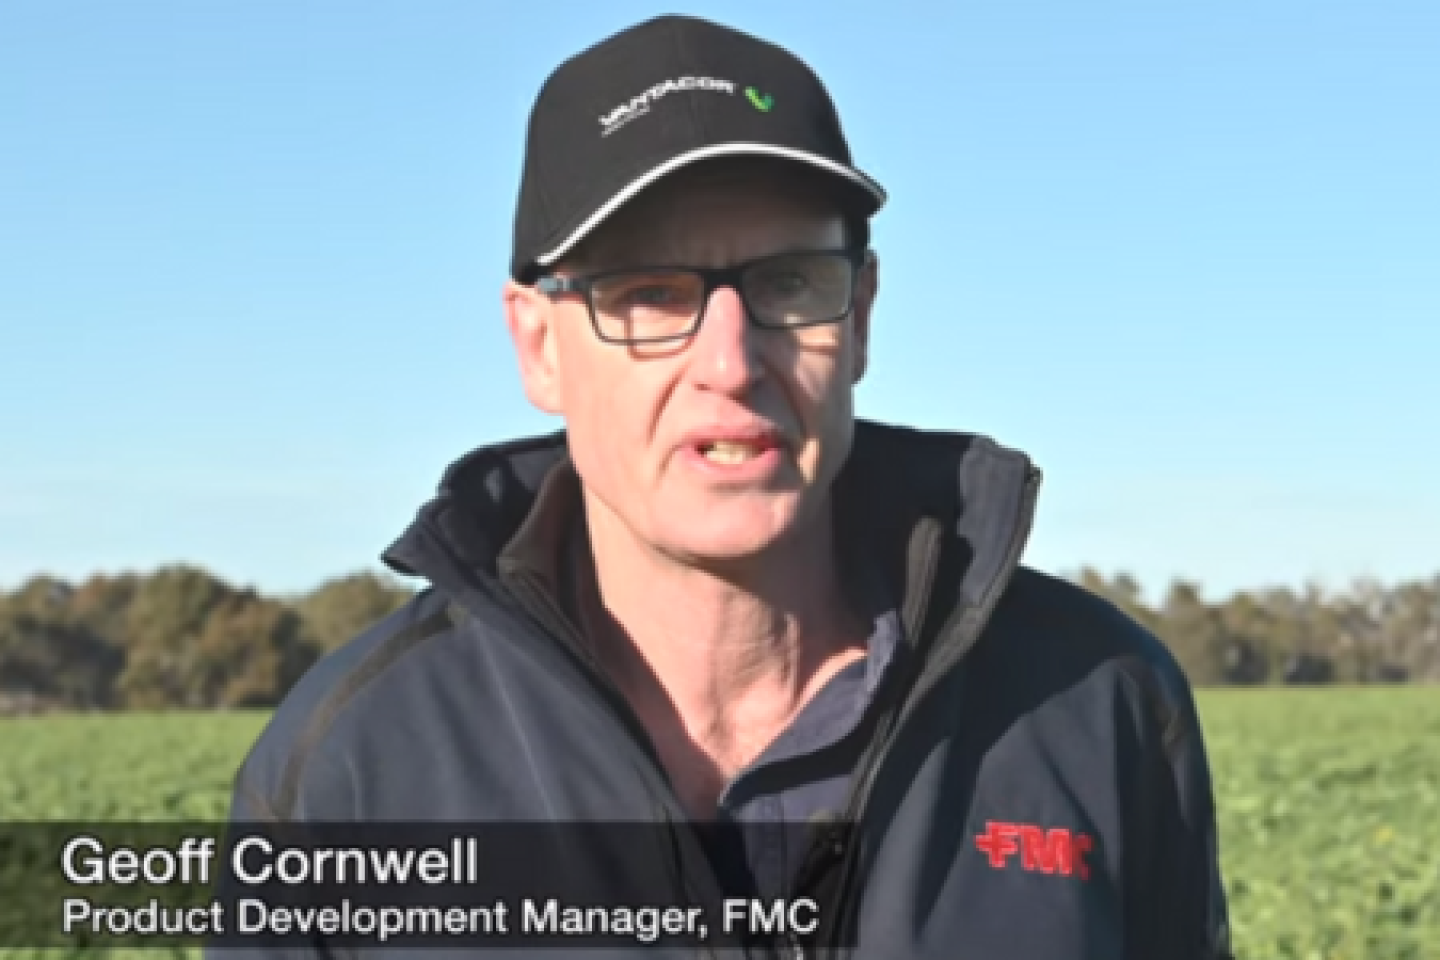 Exirel® Insecticide in Canola